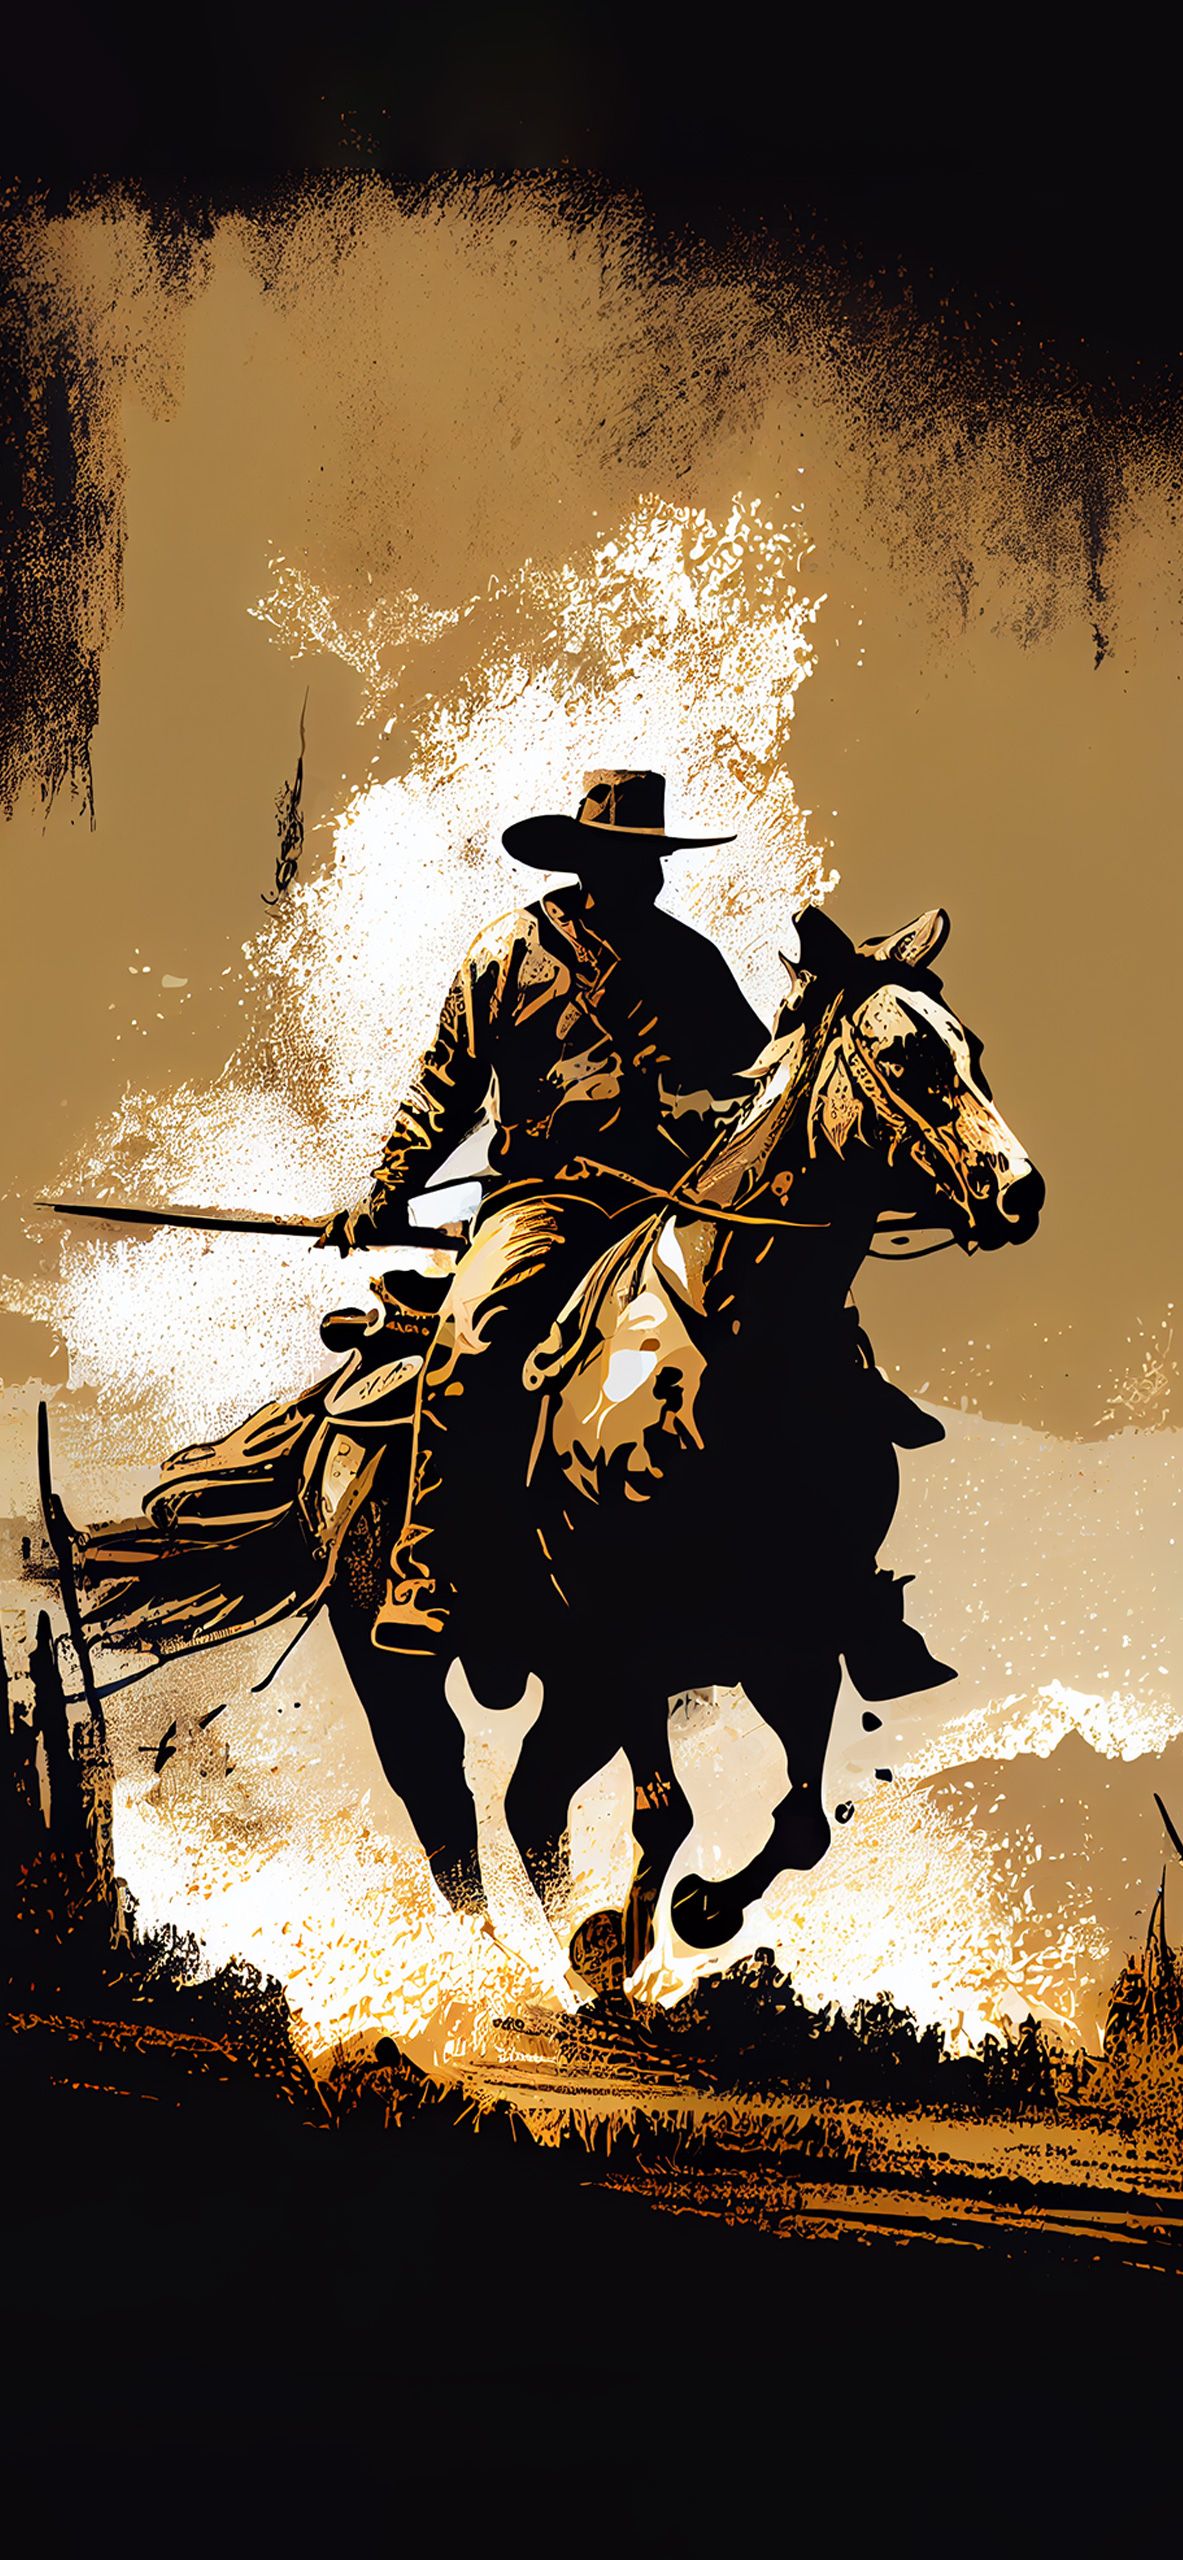 IPhone wallpaper cowboy riding a horse with a gun in hand - Western